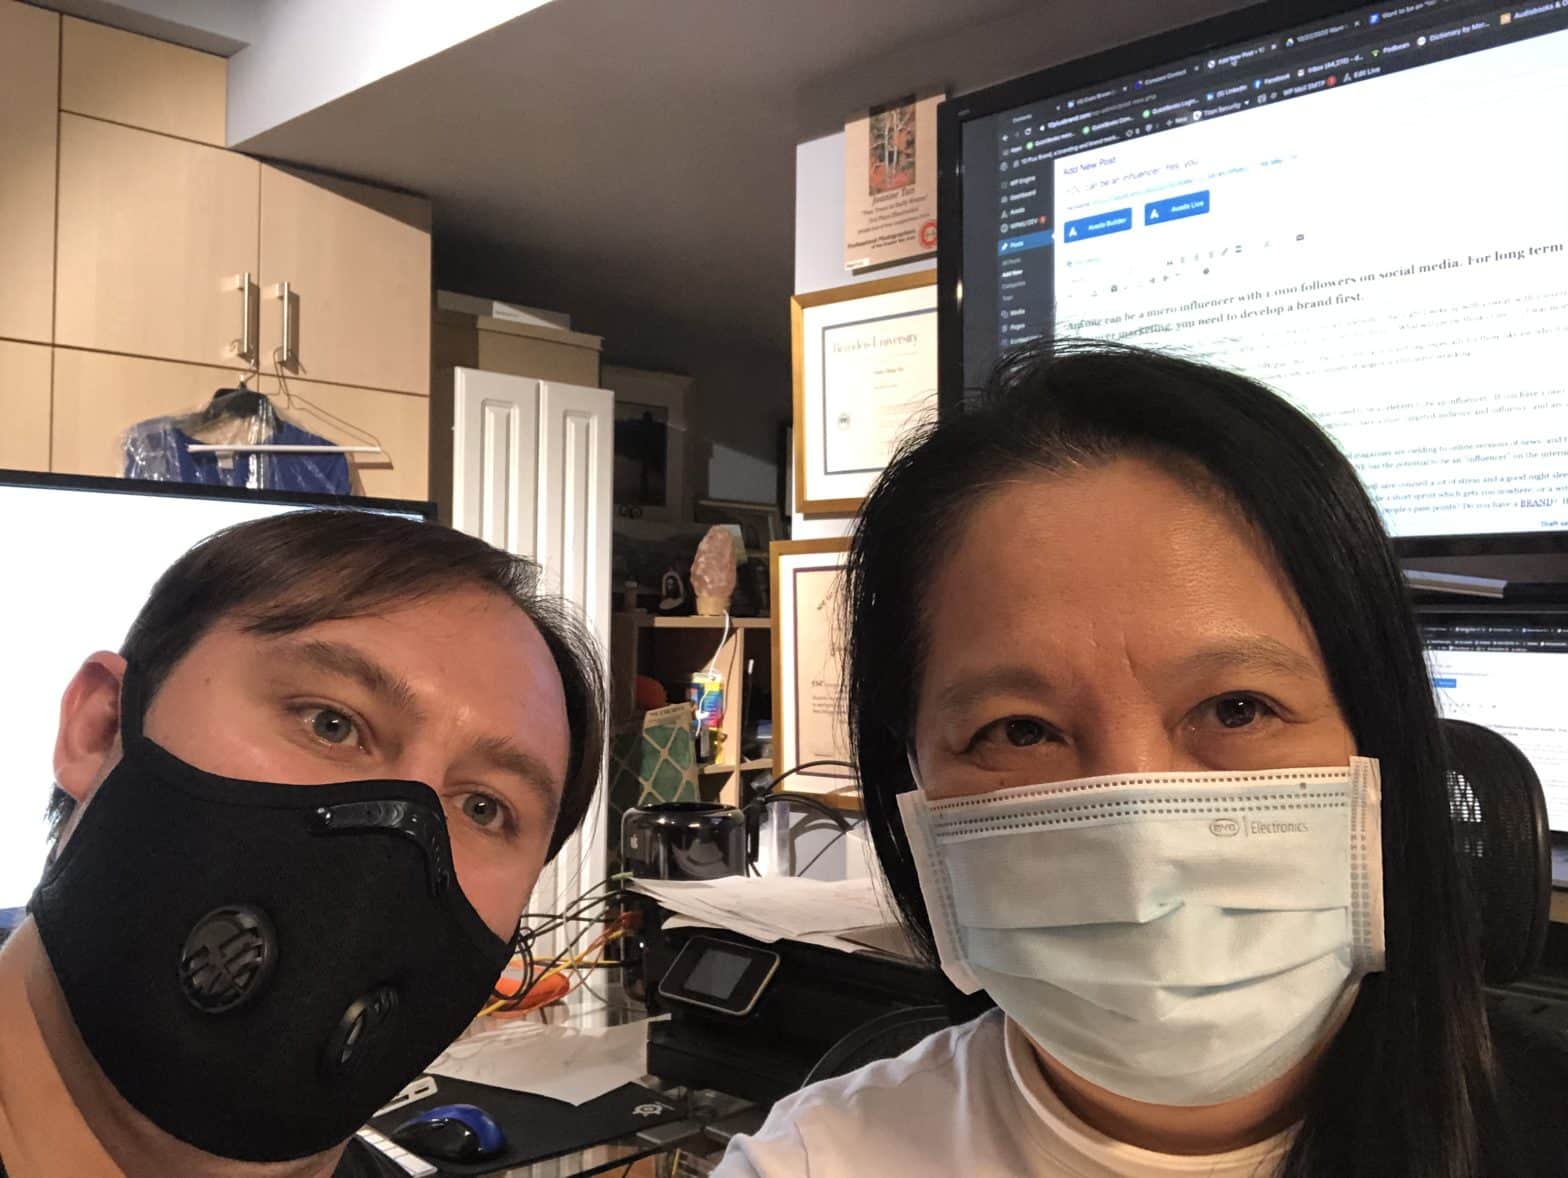 Remote working cannot be replaced with in person teamwork. (10 Plus Brand CEO Joanne Tan and her assistant David Leskin work as a team with synergy & support.)